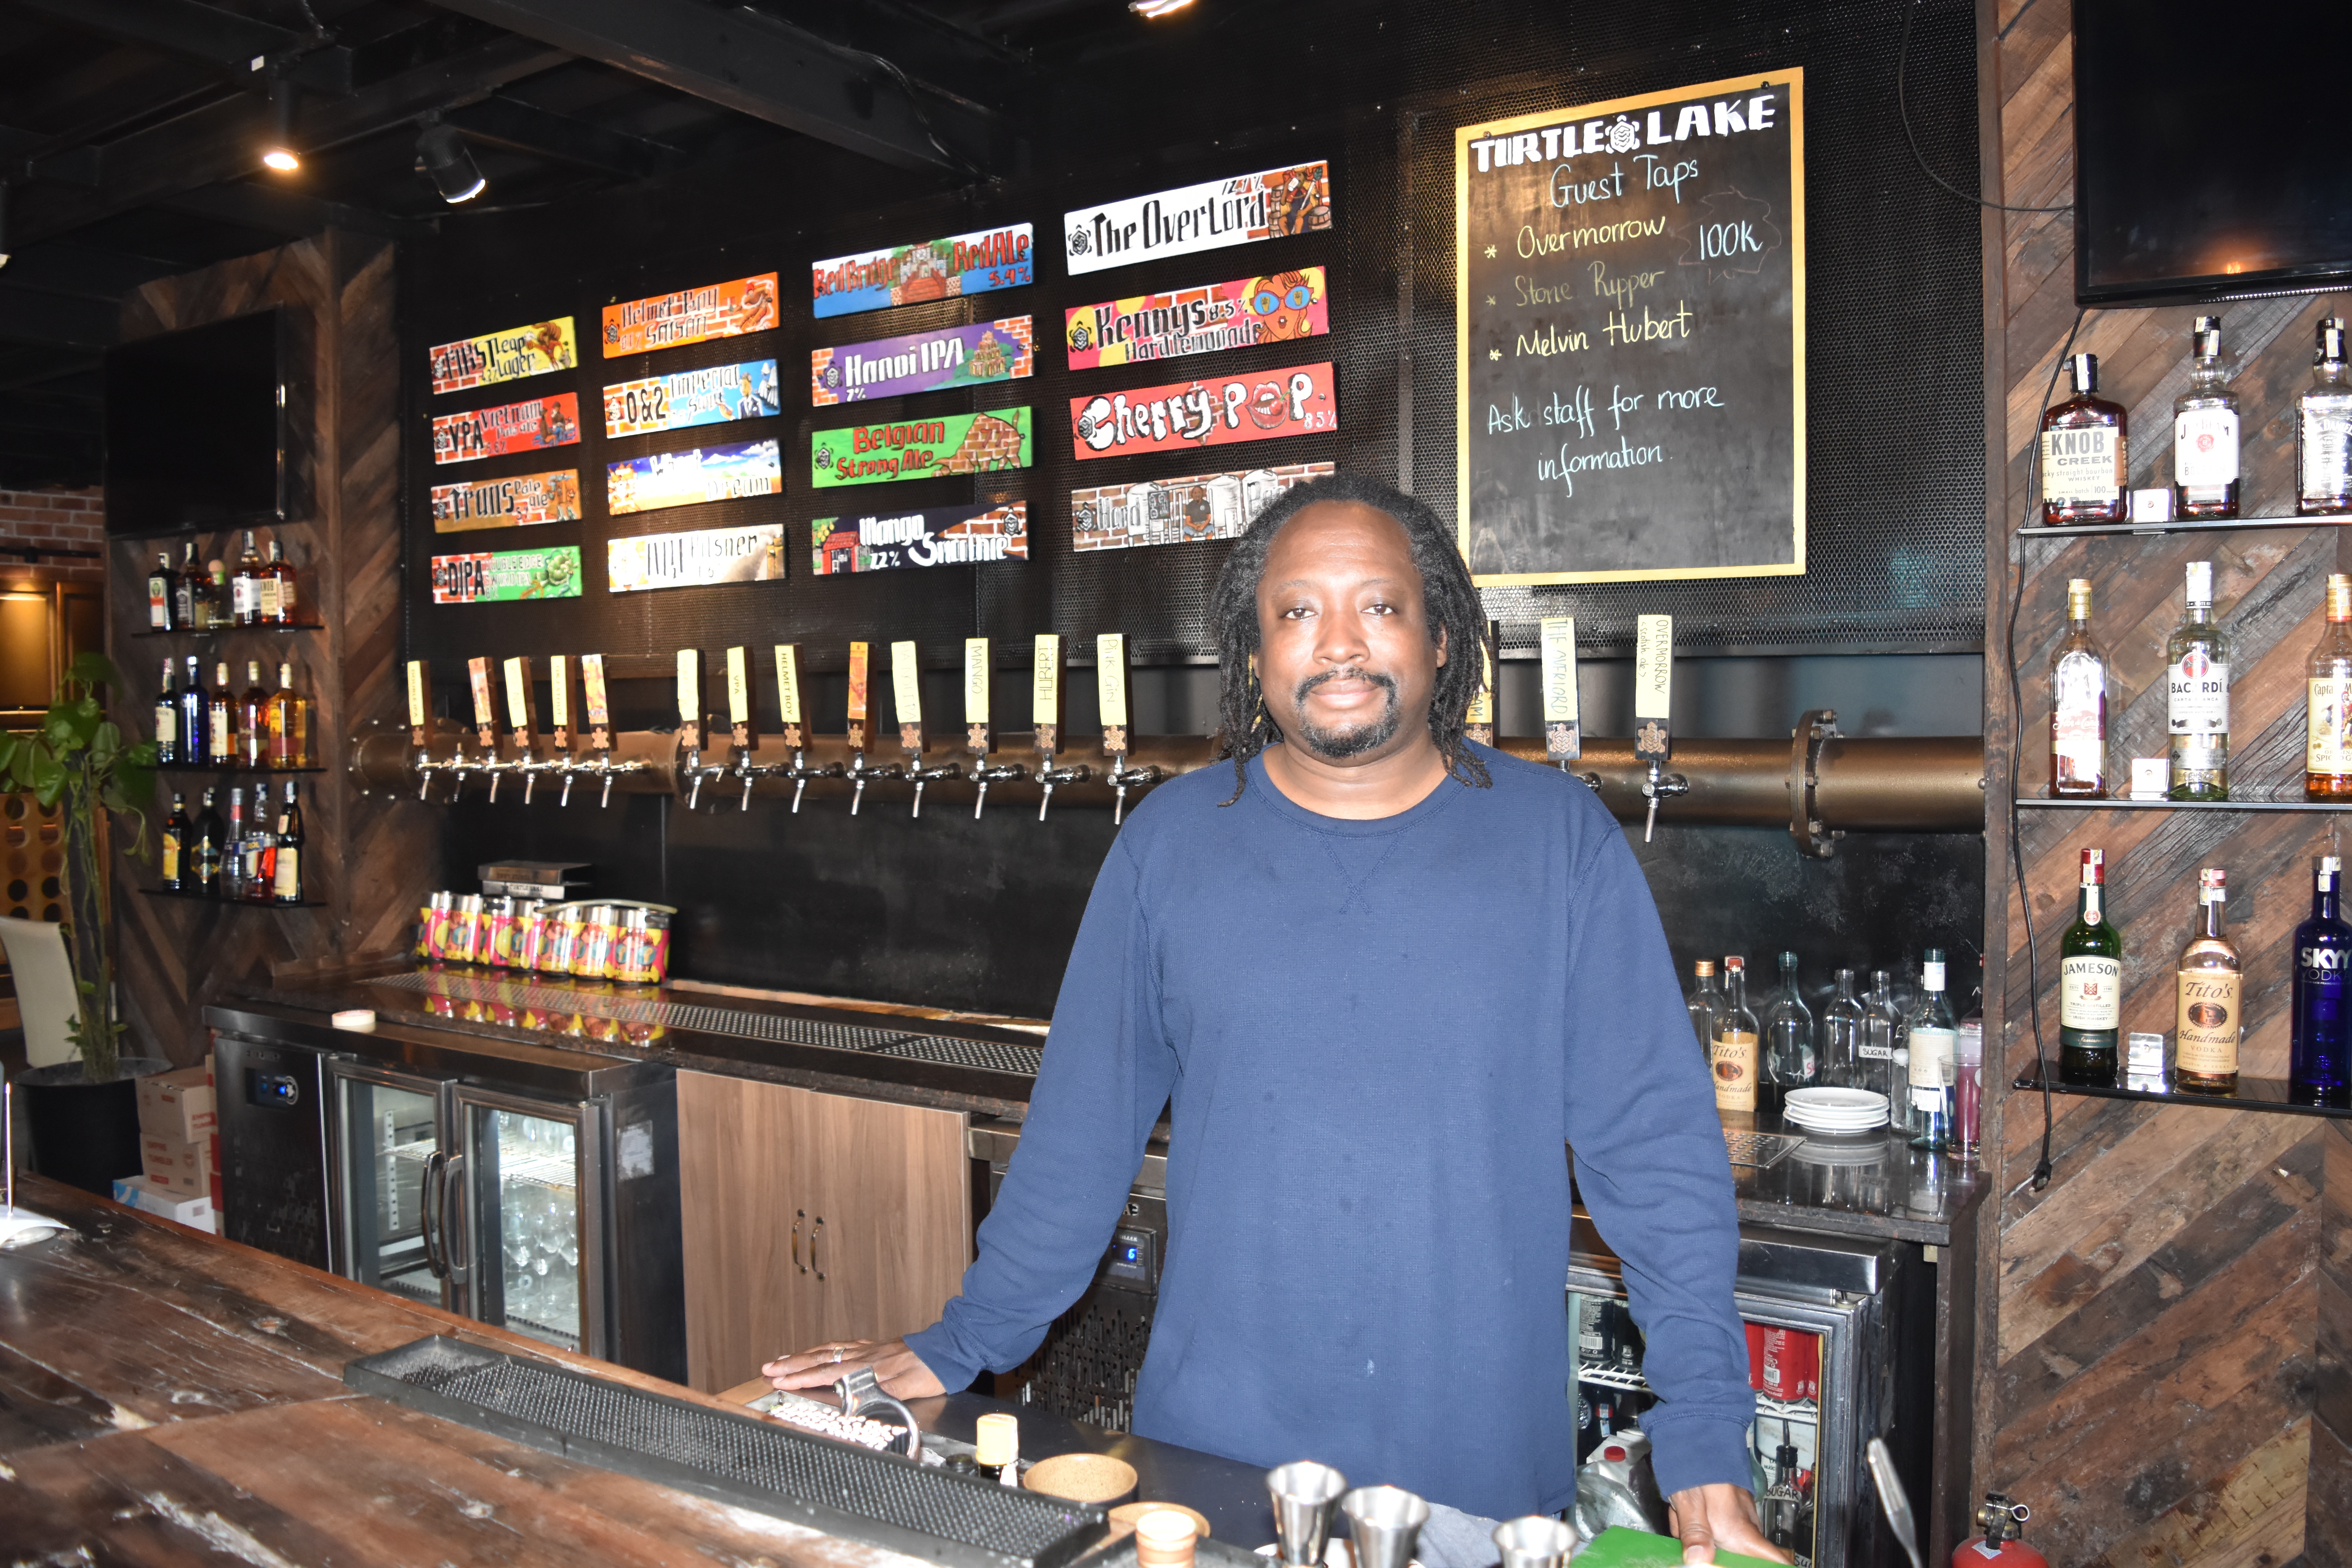 Lamont Wynn, co-owner of Turtle Lake Brewery in Hanoi, which has experienced a slump in revenue due to the extended school closure in COVID-19-hit Vietnam, is seen in this provided photo taken at his establishment.